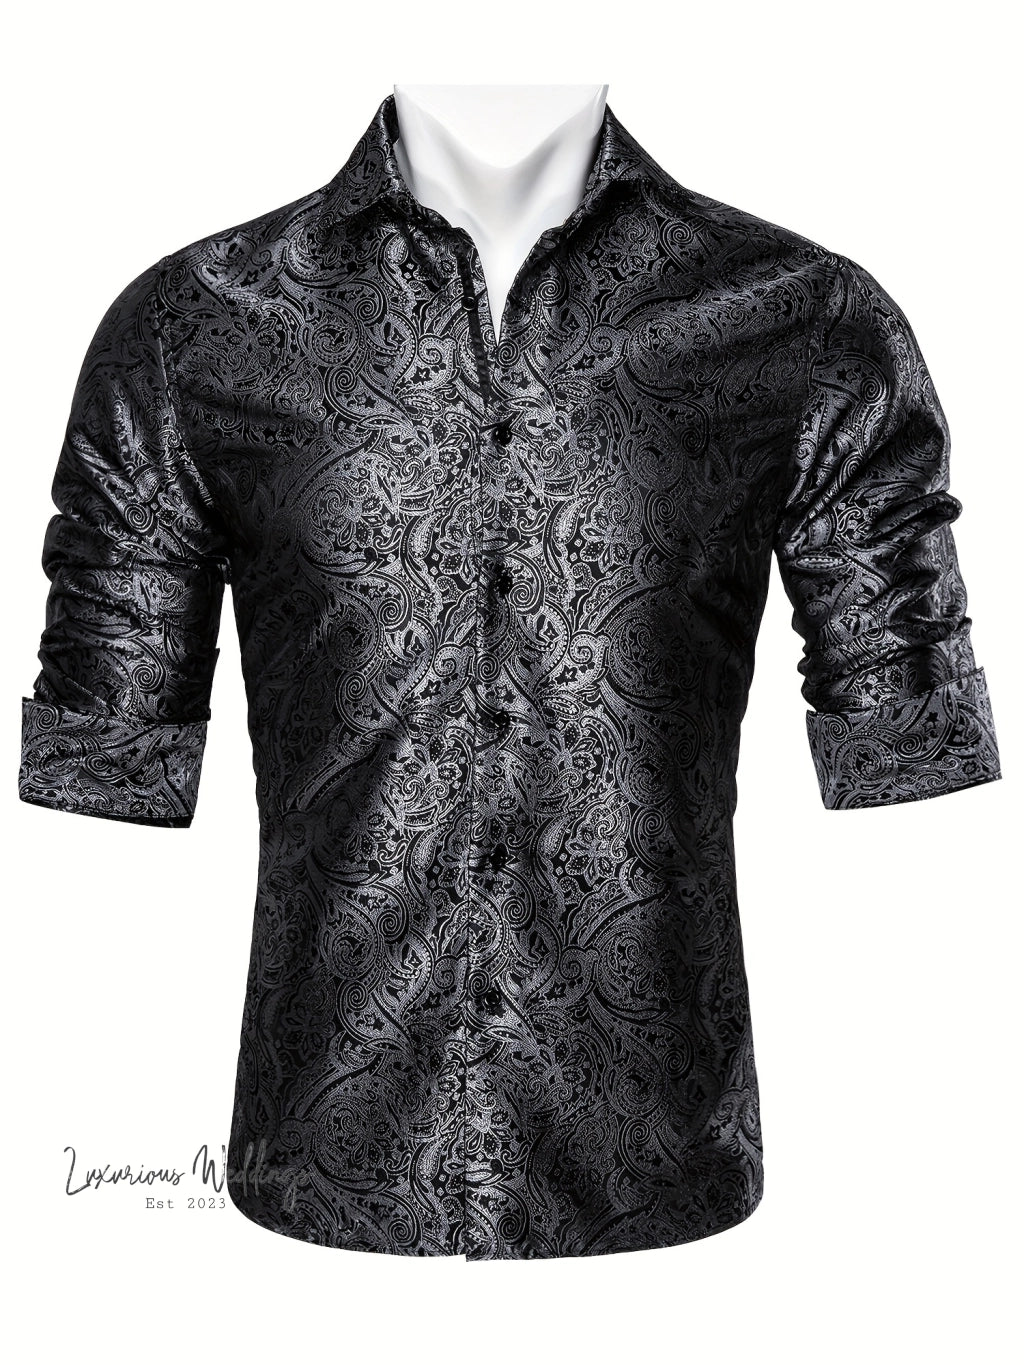 a black shirt with a paisley pattern on it